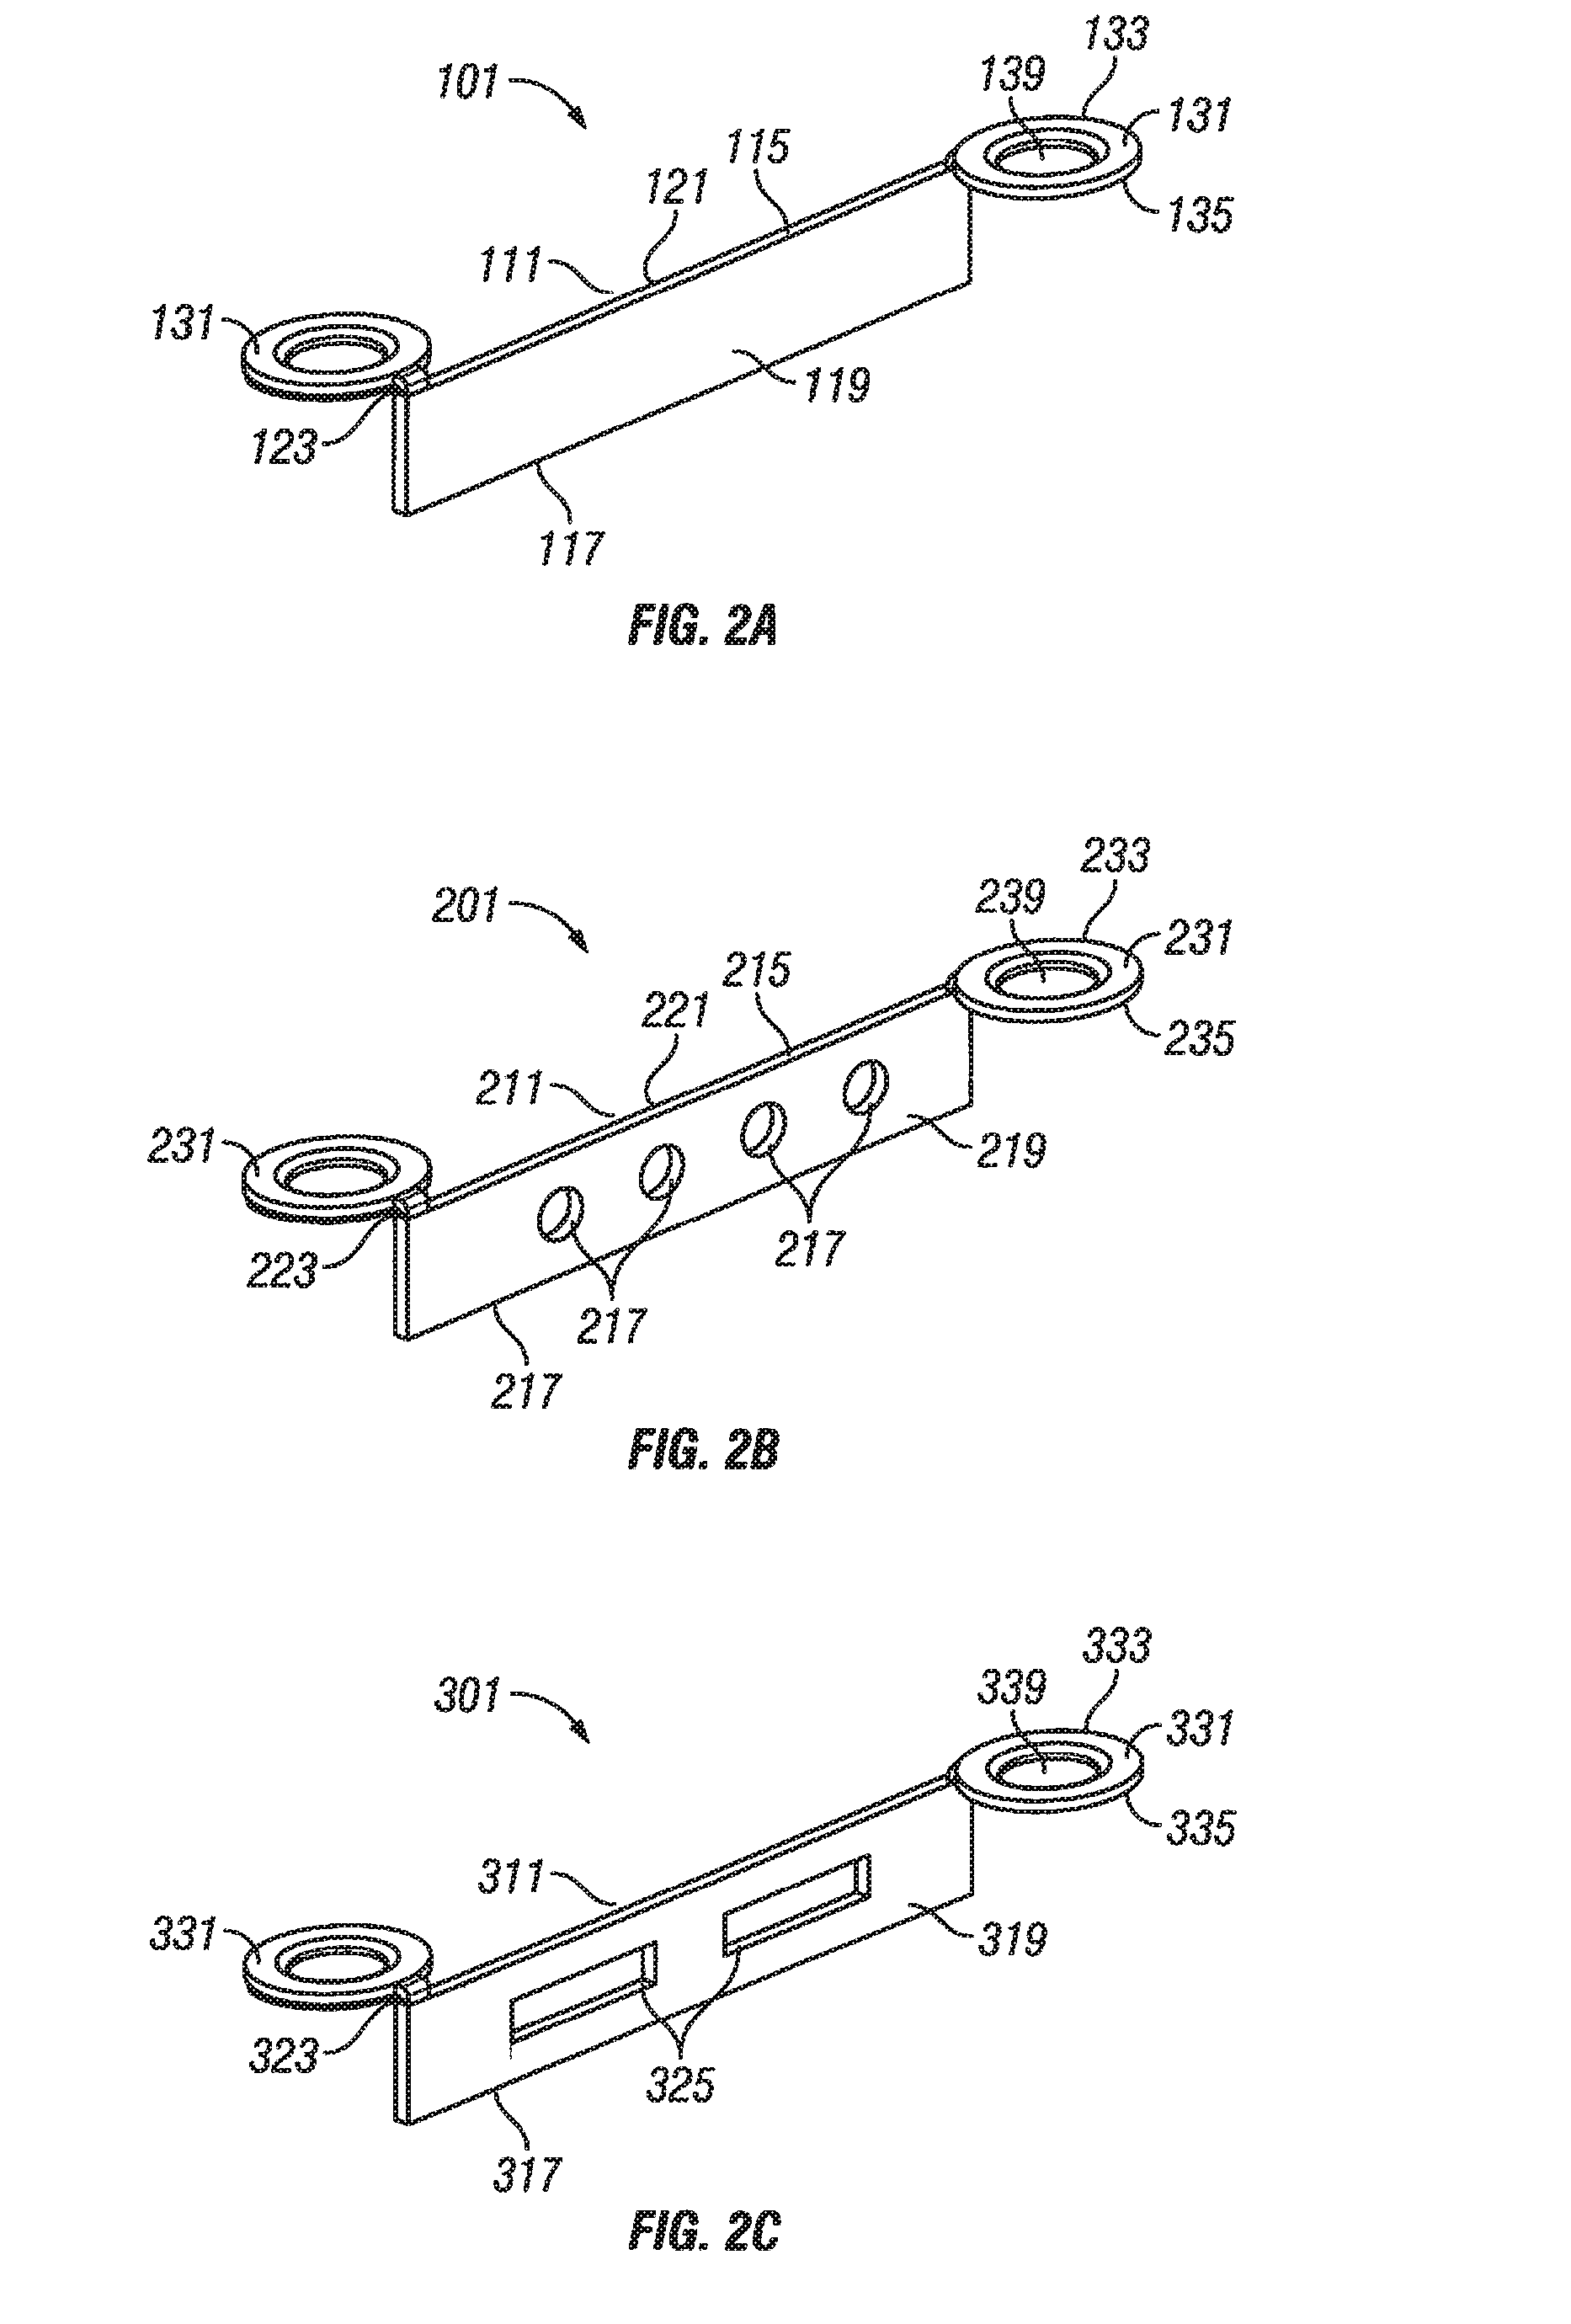 Cranial plating and bur hole cover system and methods of use